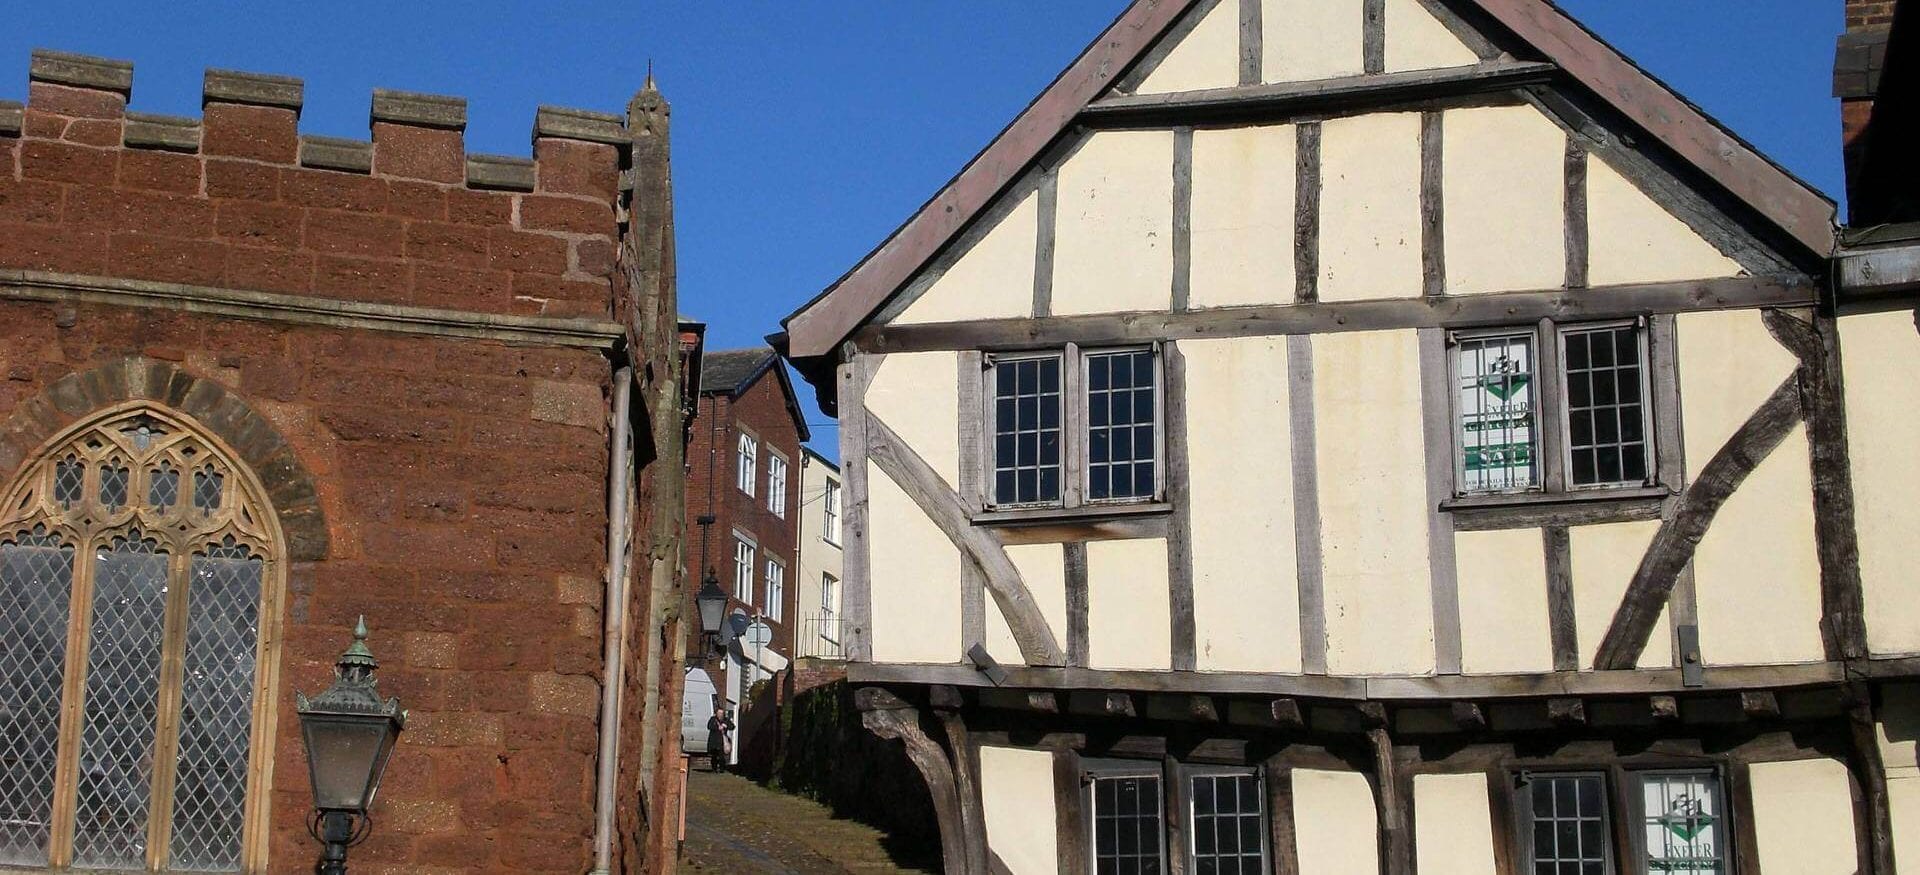 Exeter's Wonky Medieval Architecture